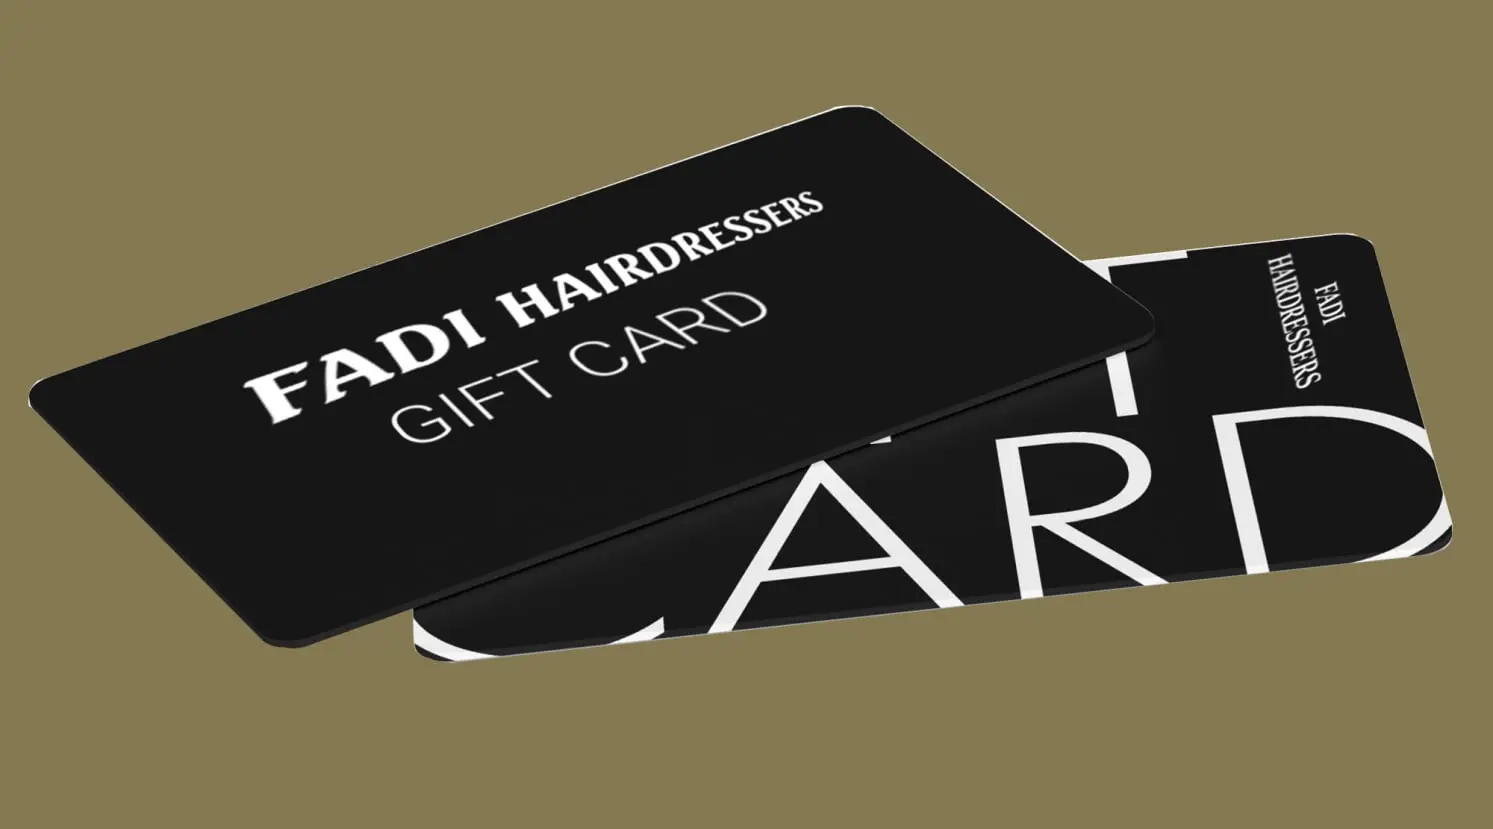 Fadi Hairdressers Gift Card